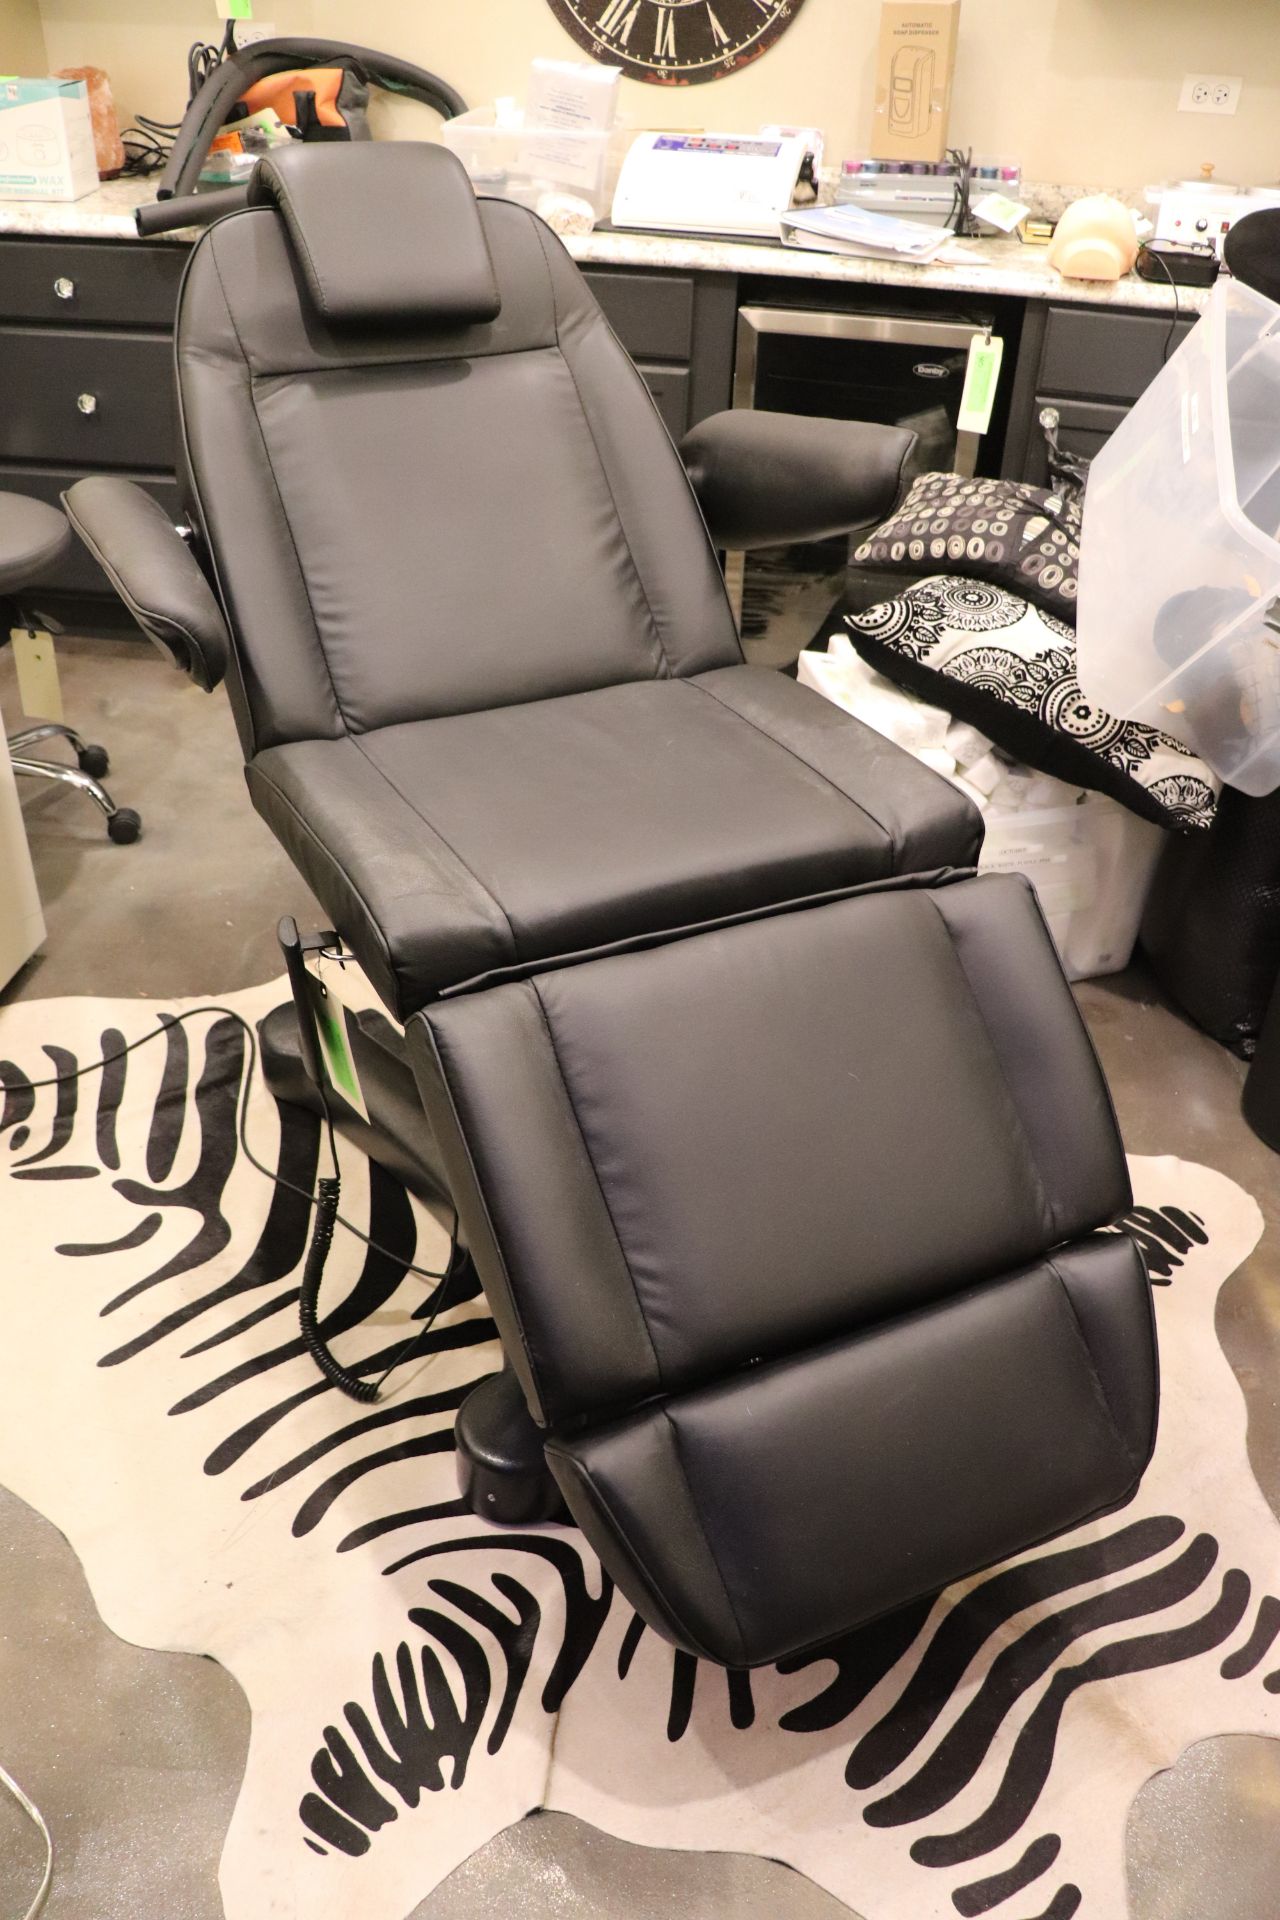 Electric Motorized Spa and Salon Chair - Image 2 of 4